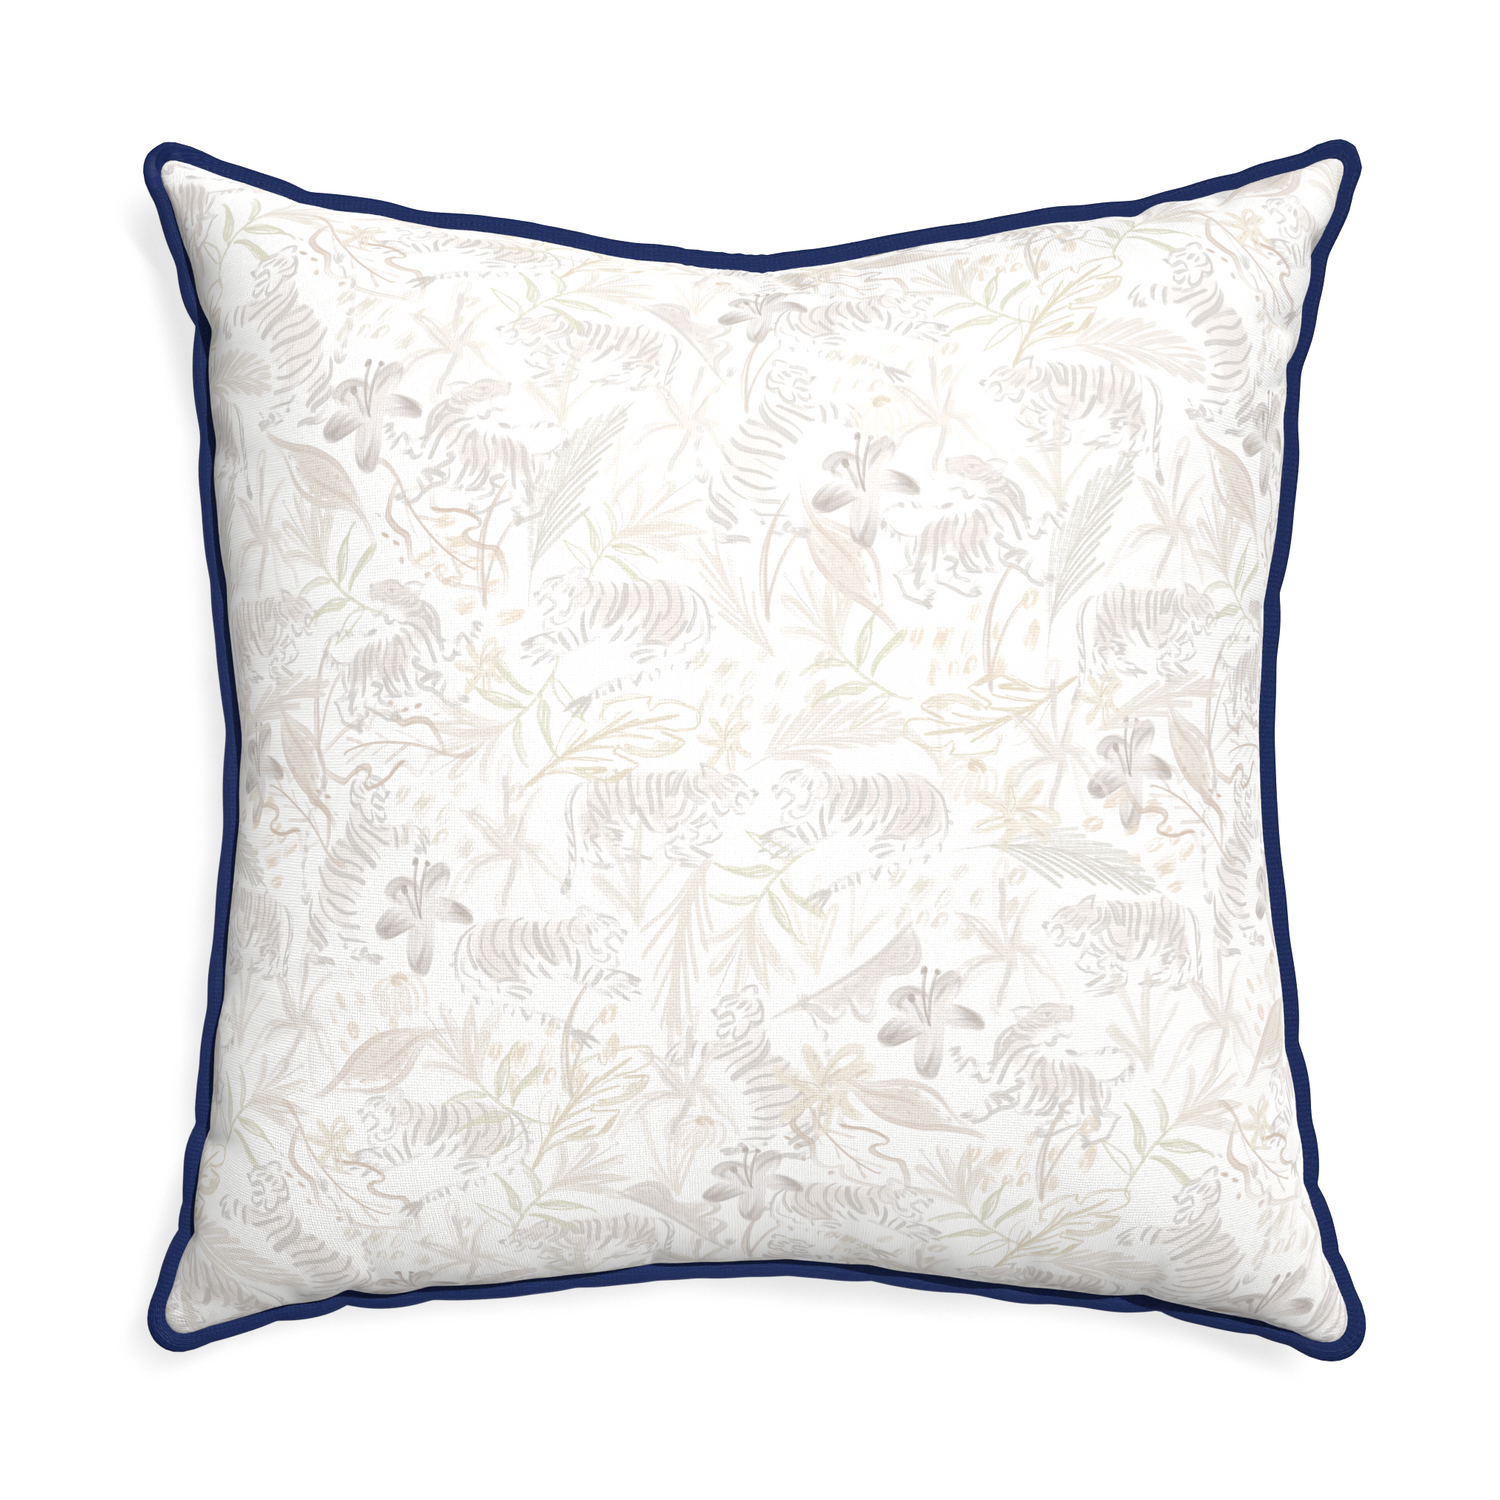 Euro-sham frida sand custom beige chinoiserie tigerpillow with midnight piping on white background